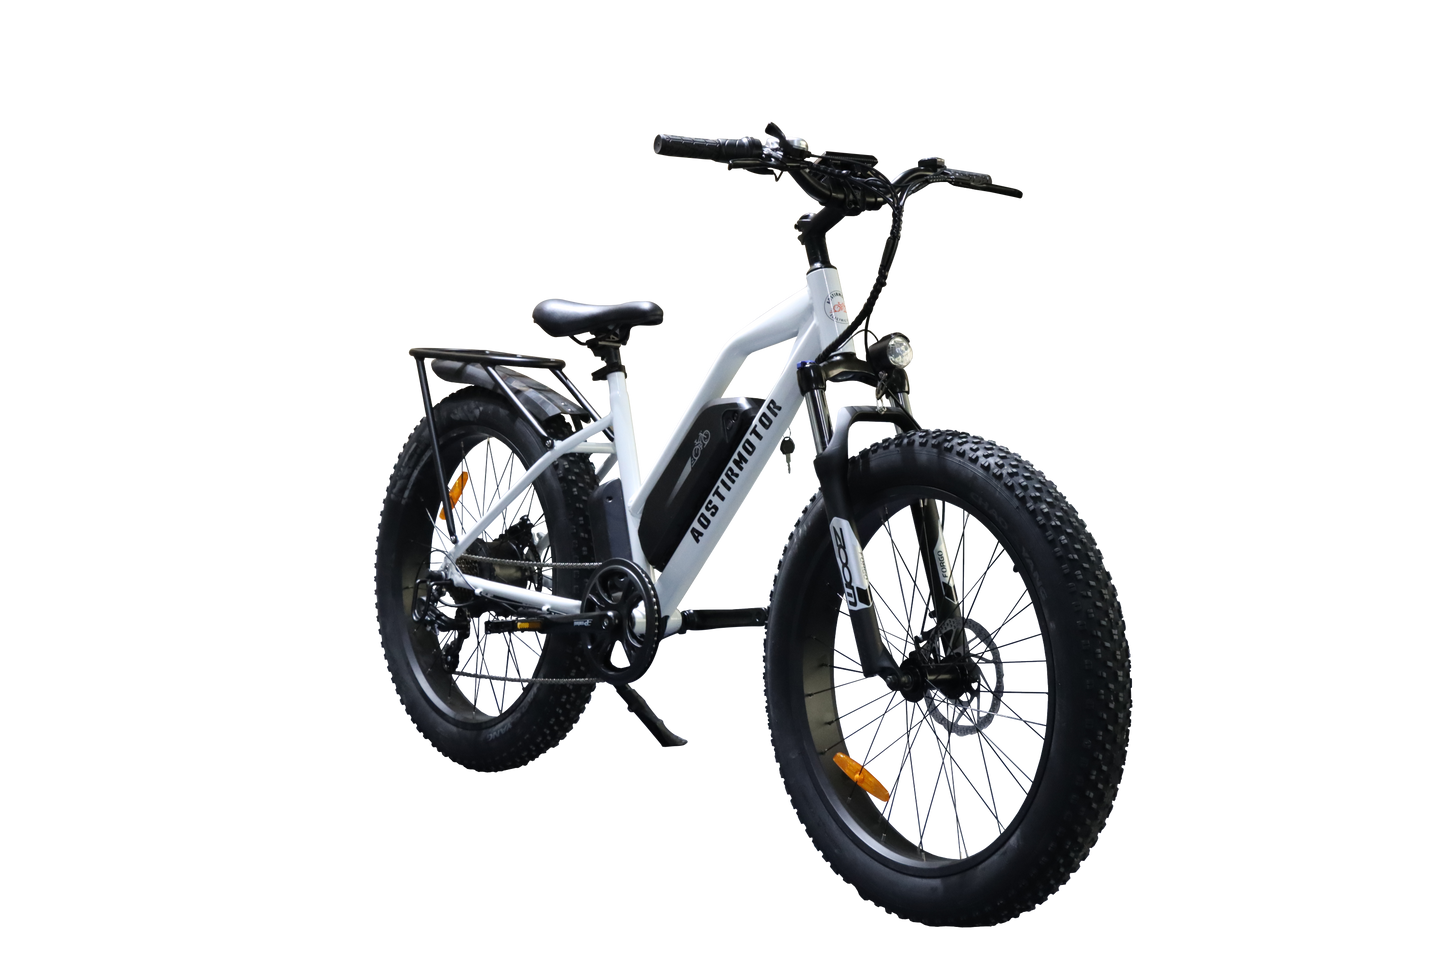 26" 750W Camouflage Electric Bike Fat Tire P7 48V 13AH Removable Lithium Battery for Adults with Detachable Rear Rack Fender (White)S07-G